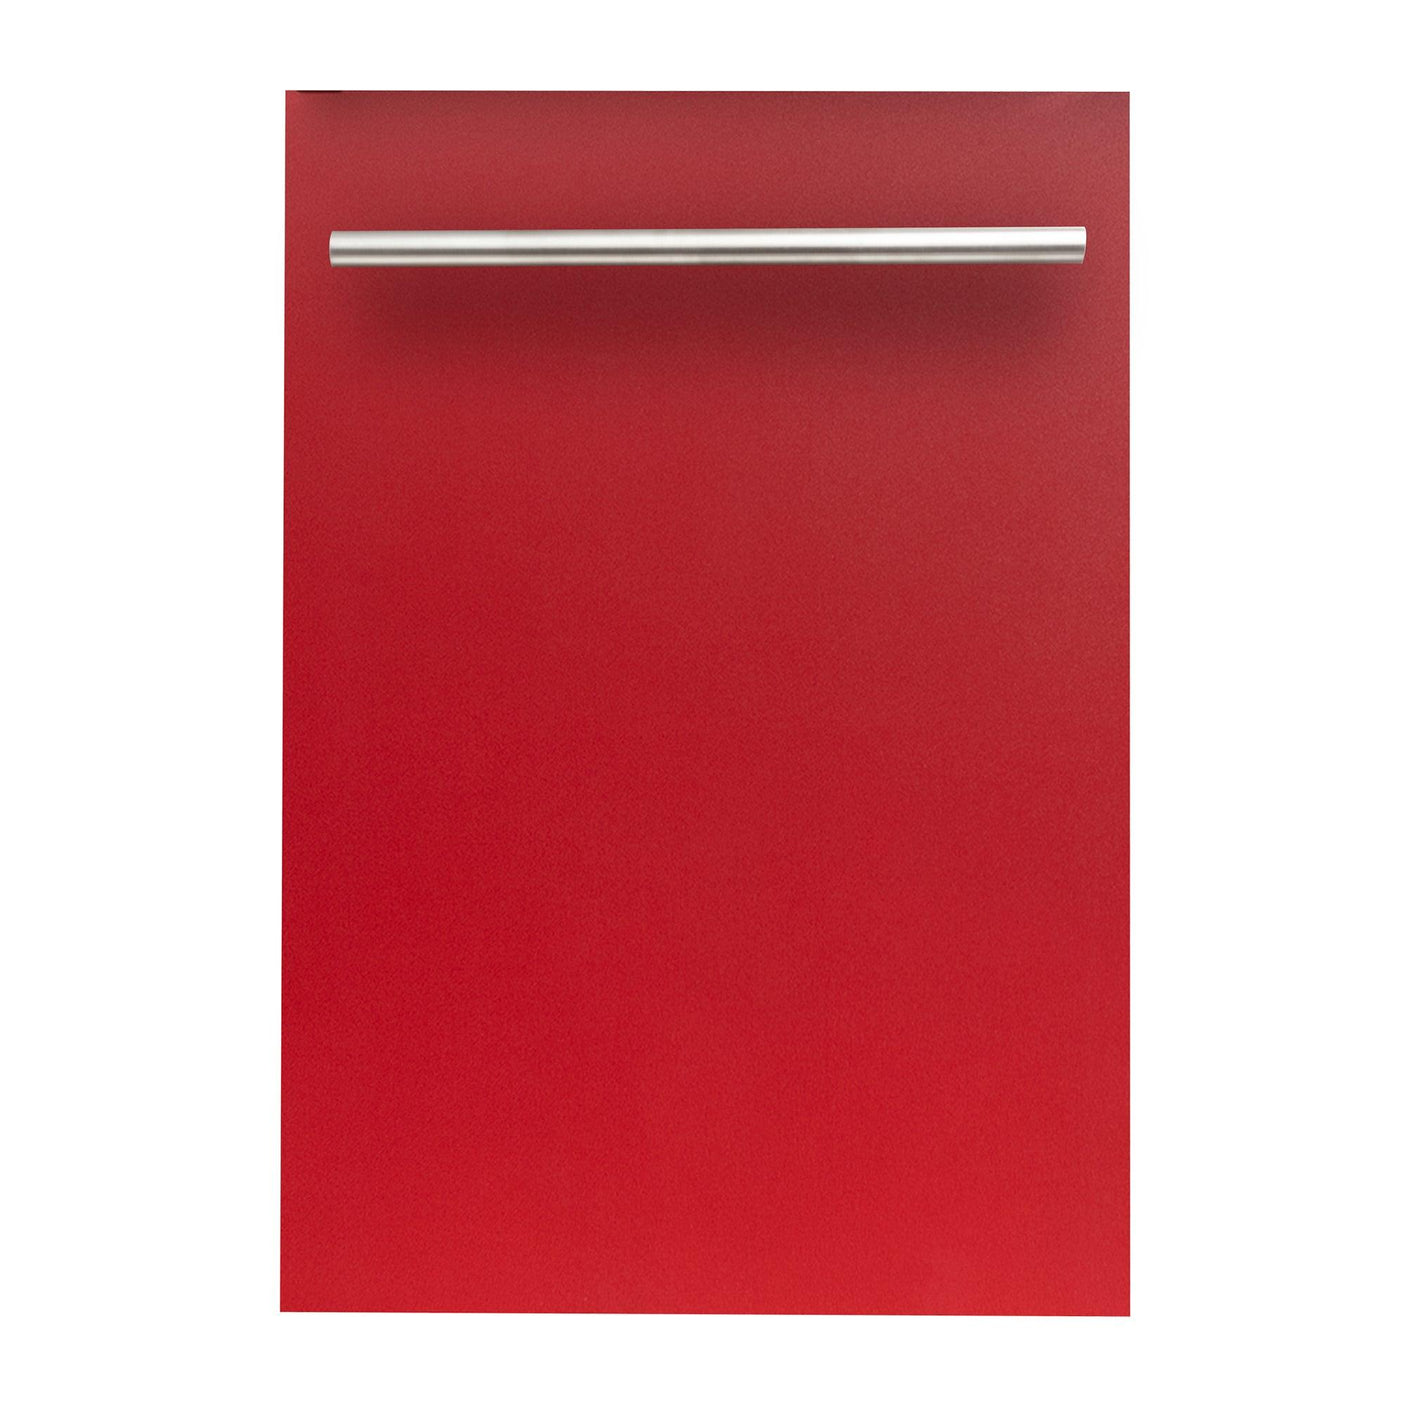 ZLINE 18 in. Compact Top Control Dishwasher with Stainless Steel Tub and Modern Style Handle, 52 dBa (DW-18) [Color: Red Gloss]